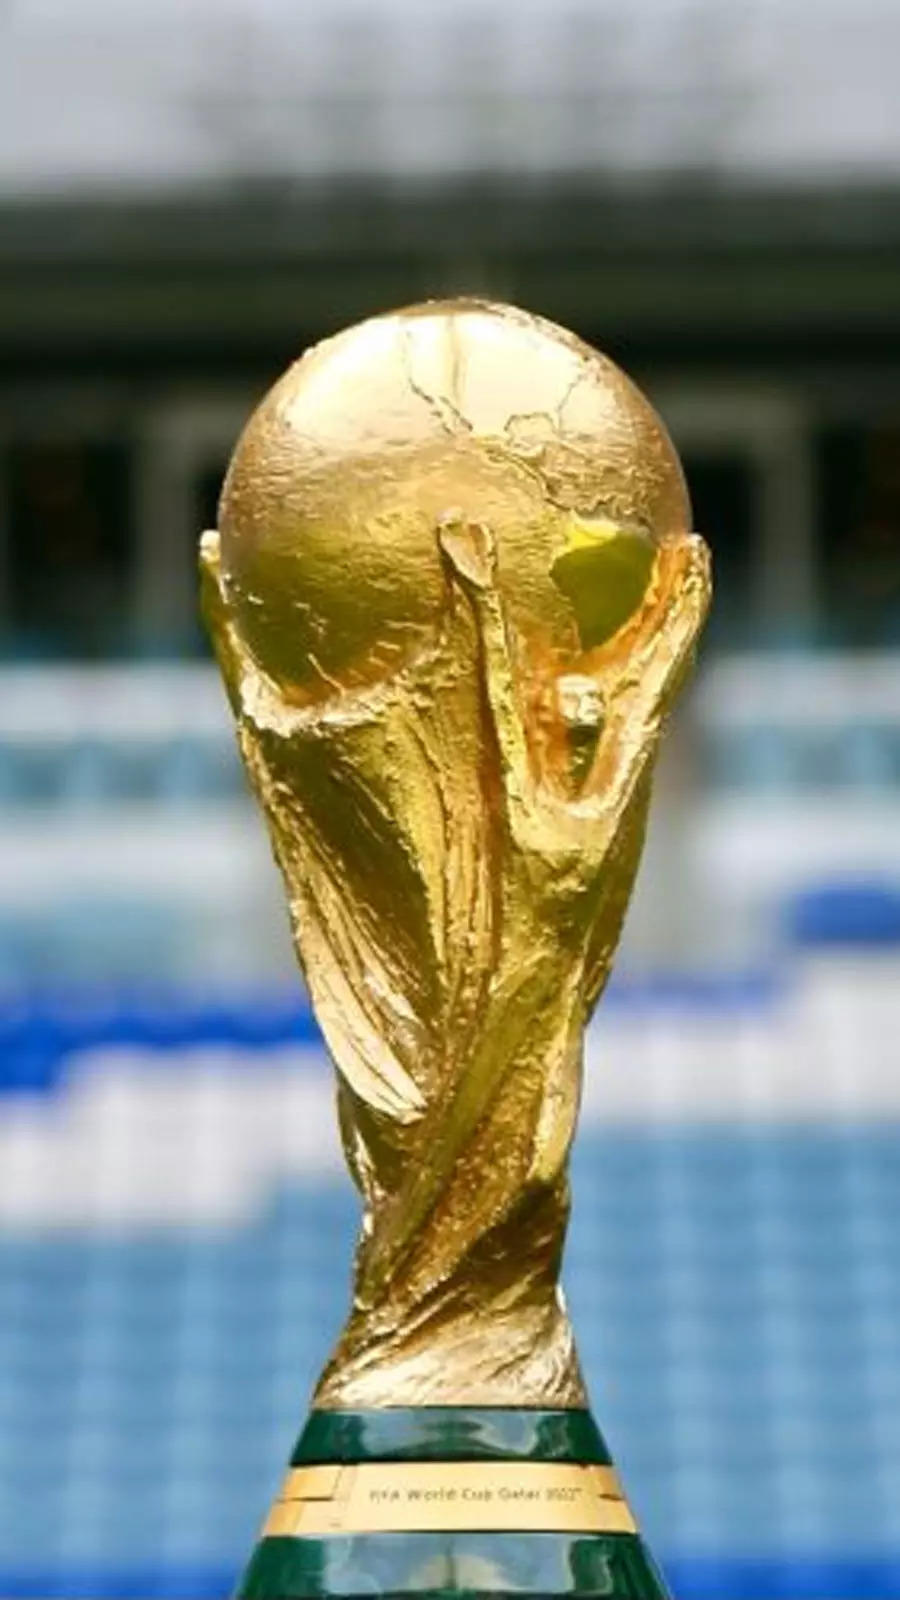 11 Facts You Didn't Know About The 2022 FIFA World Cup Trophy